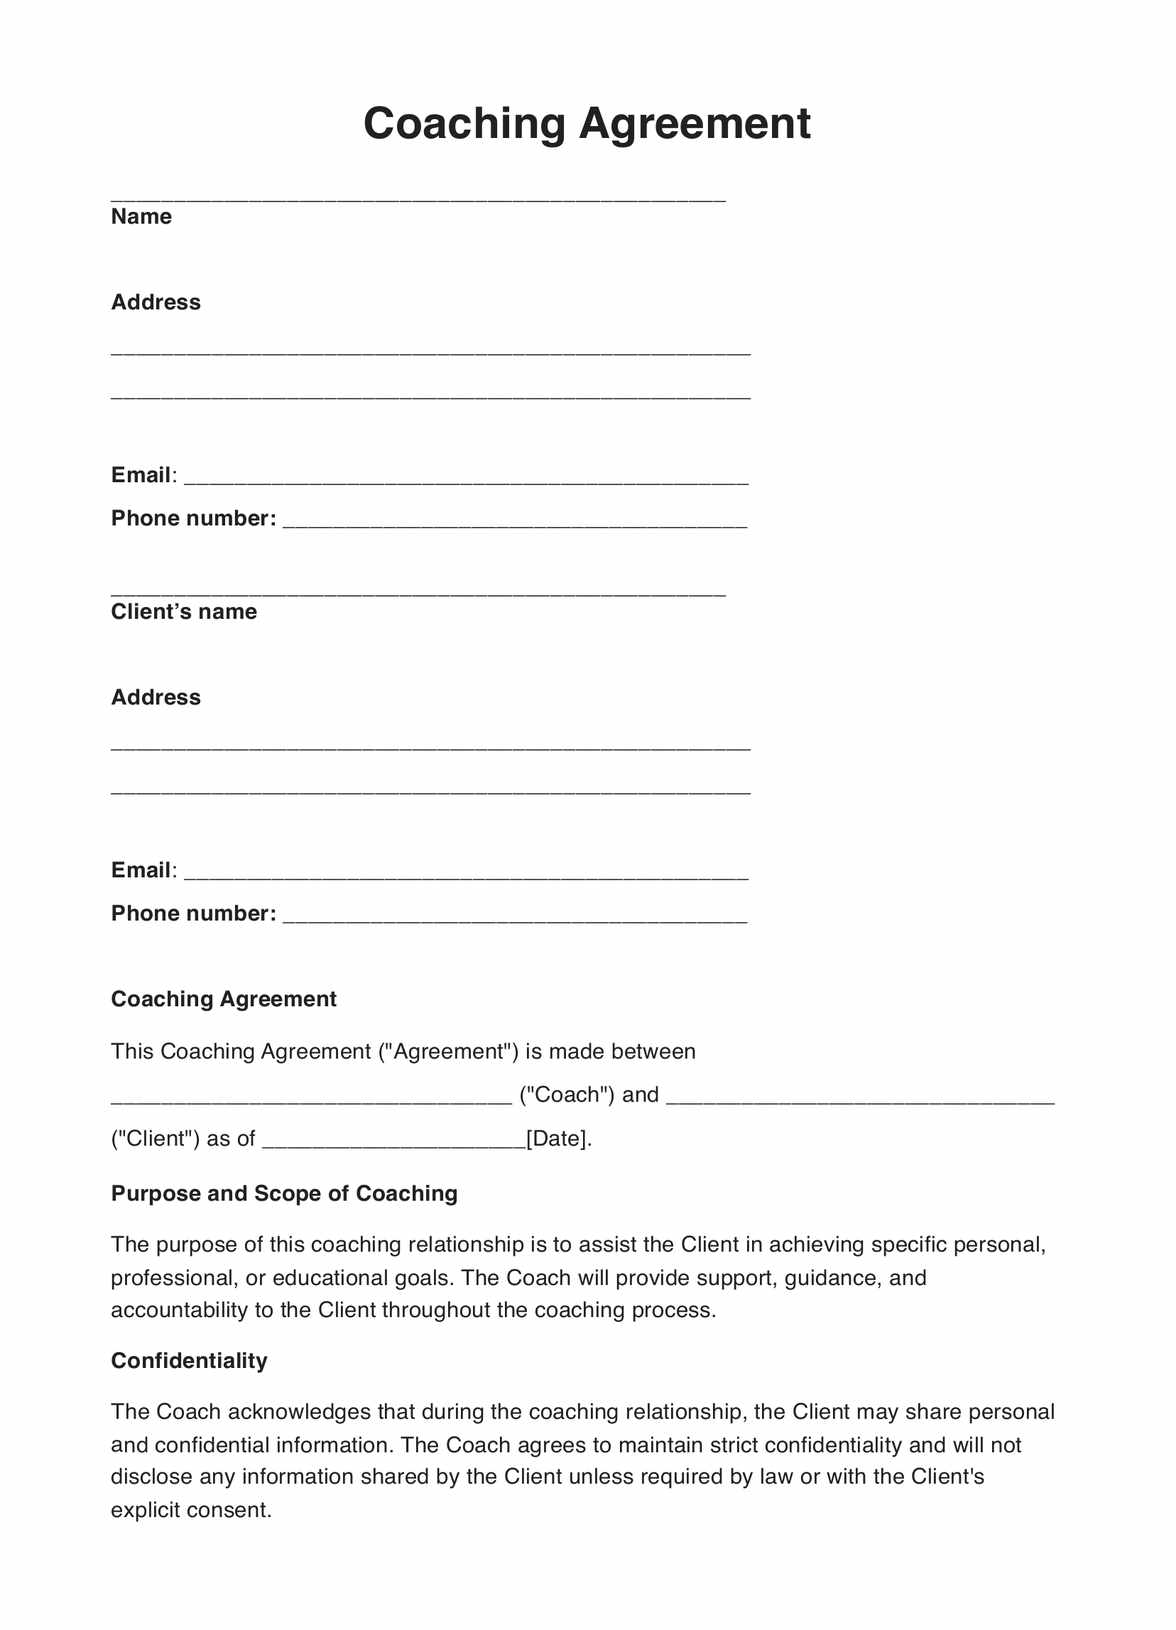 Coaching Agreements PDF Example